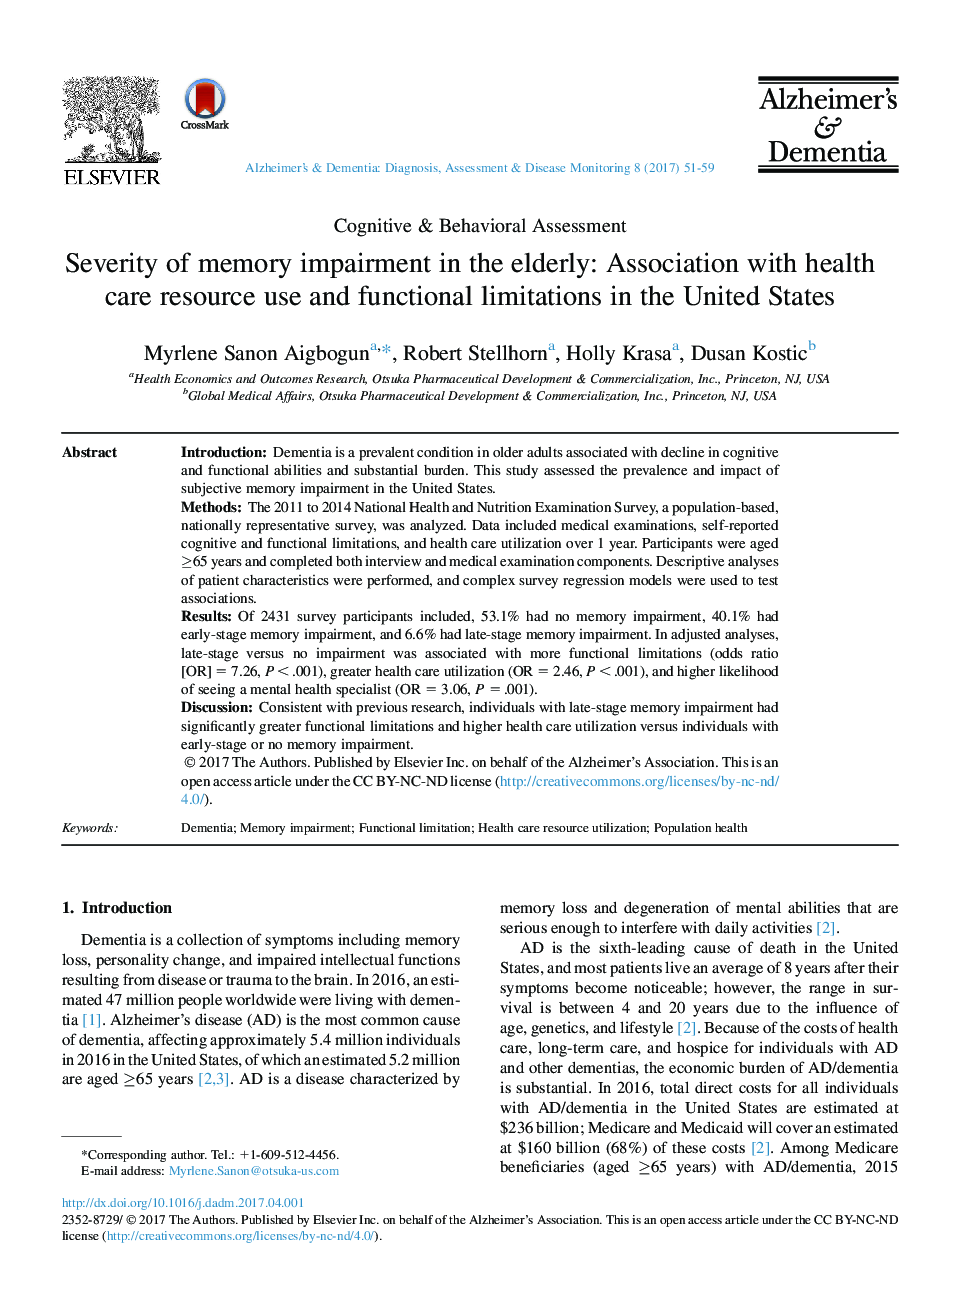 Severity of memory impairment in the elderly: Association with health care resource use and functional limitations in the United States